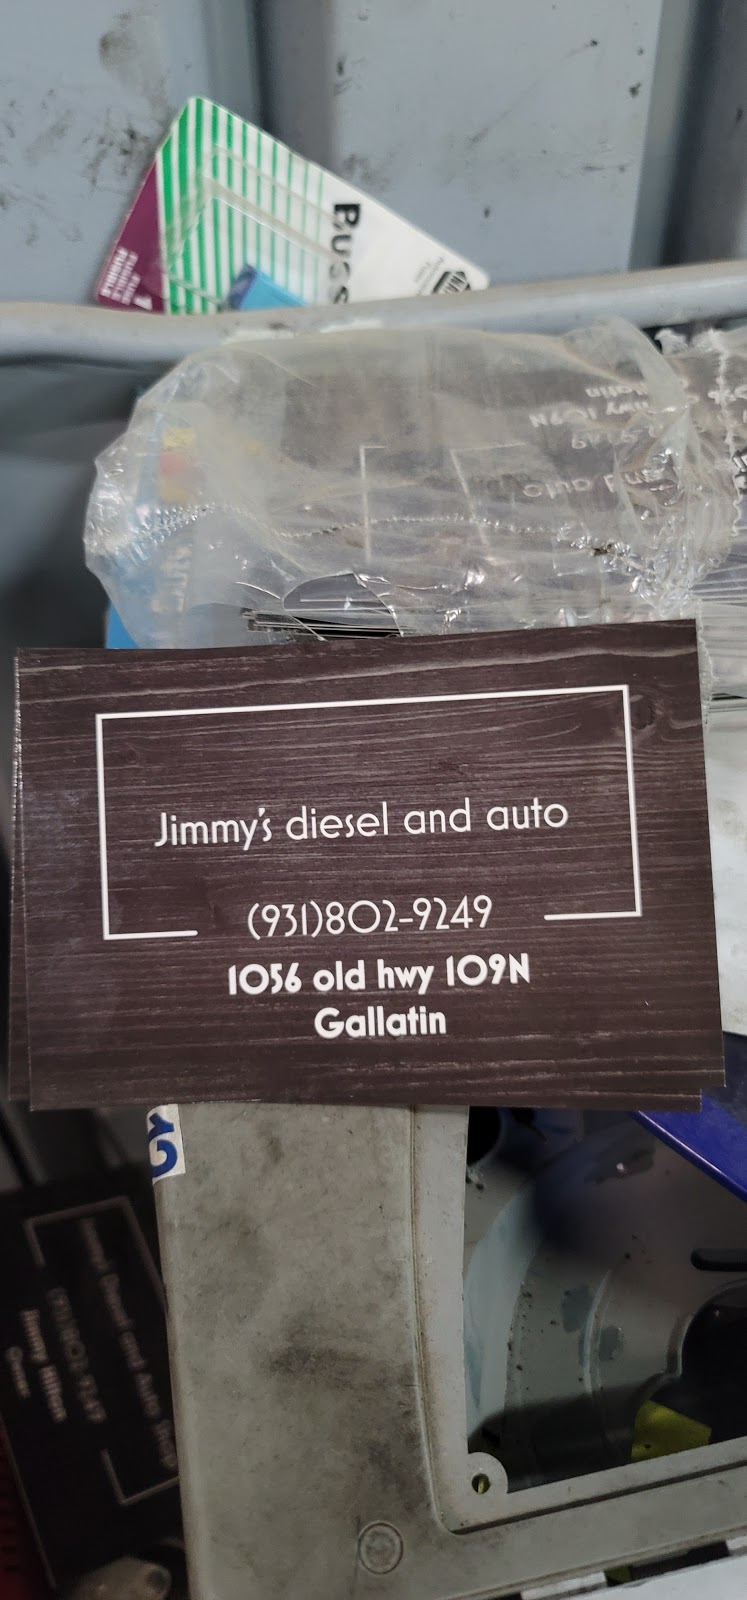 Jimmys Diesel And Auto Shop | 1056 Old State Hwy 109, Gallatin, TN 37066, USA | Phone: (931) 802-9249